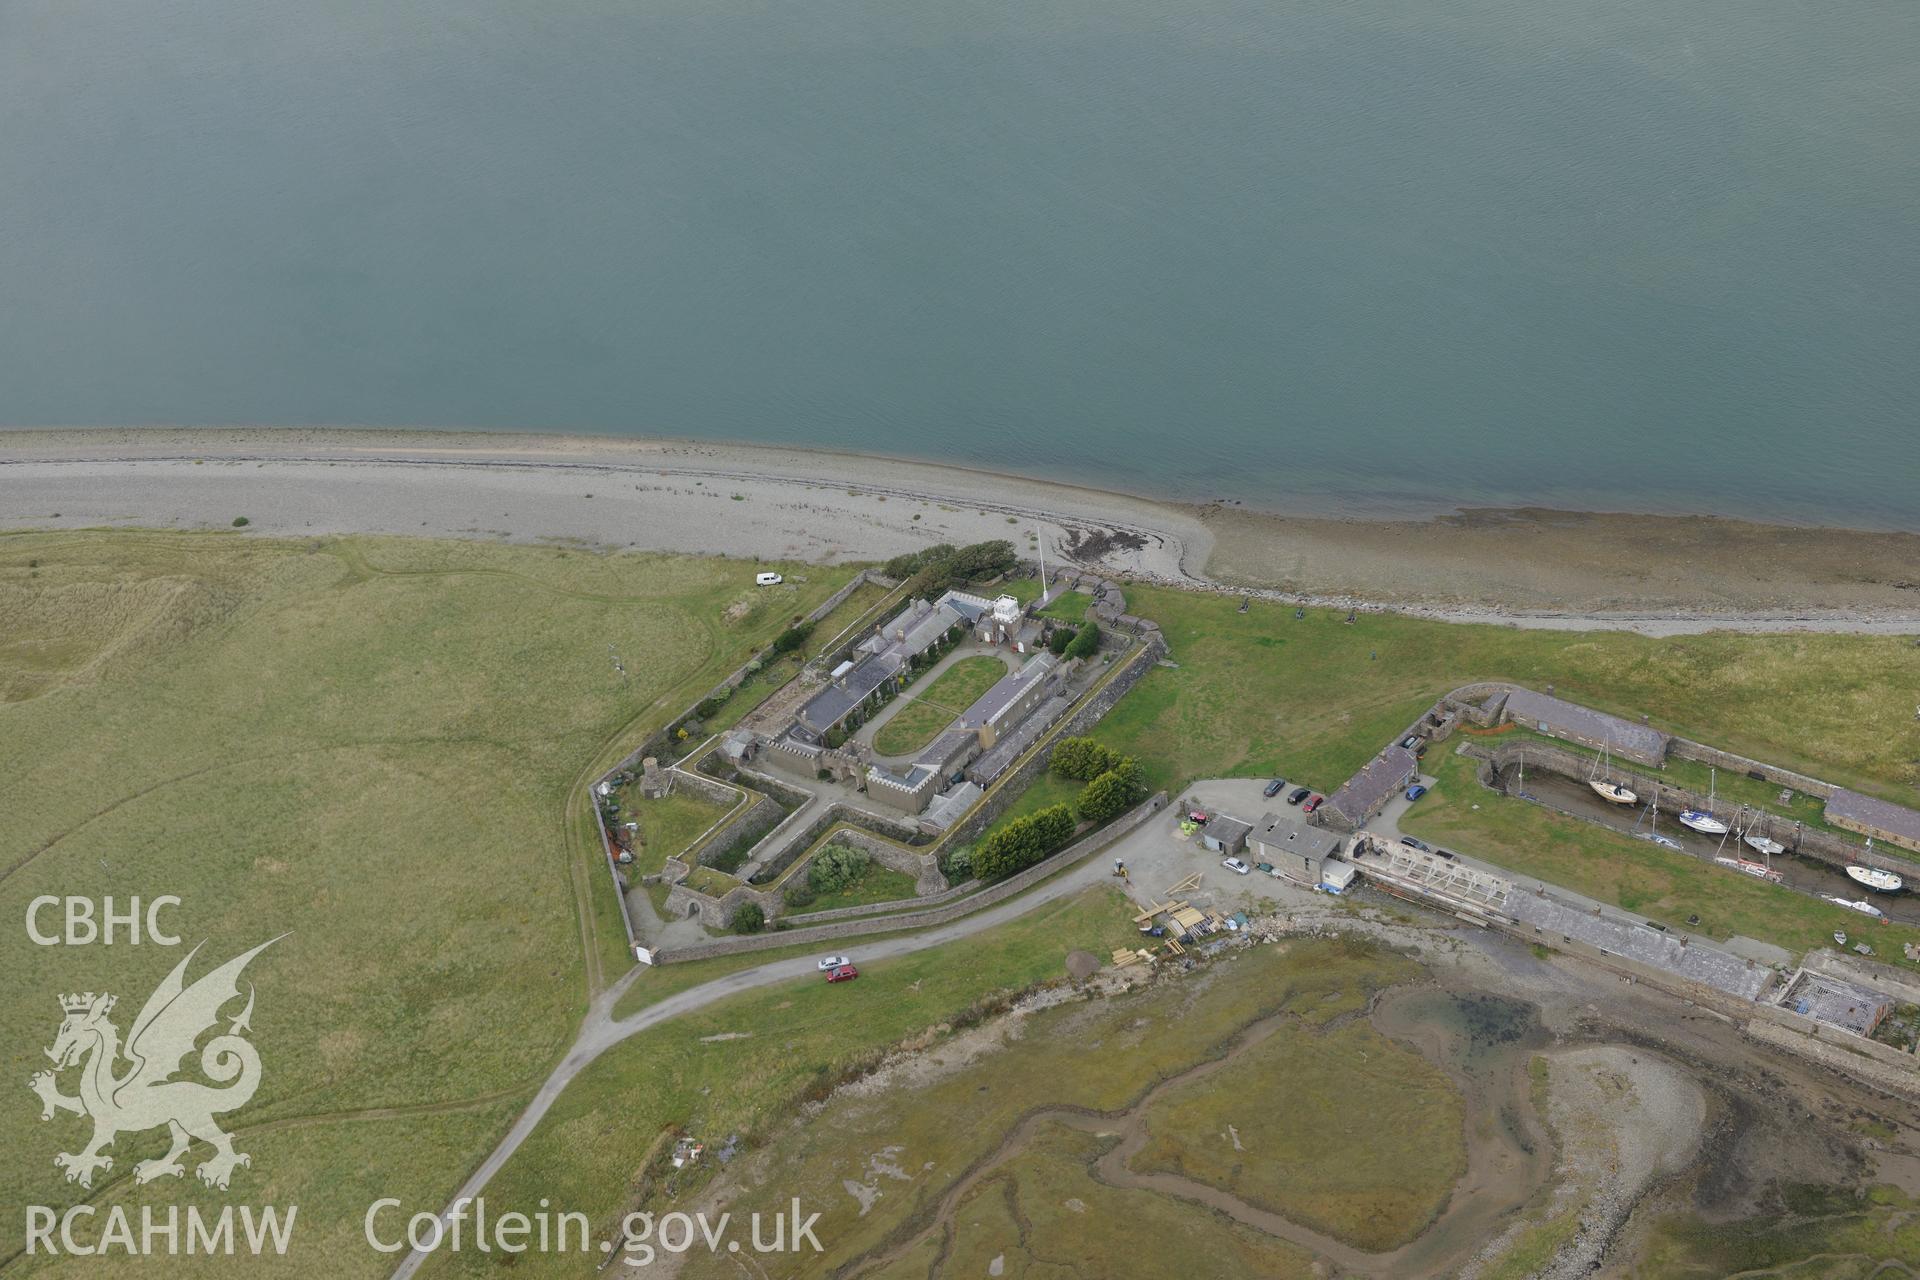 Fort Belan and Fort Belan dockyard, Llandwrog. Oblique aerial photograph taken during the Royal Commission's programme of archaeological aerial reconnaissance by Toby Driver on 11th September 2015.